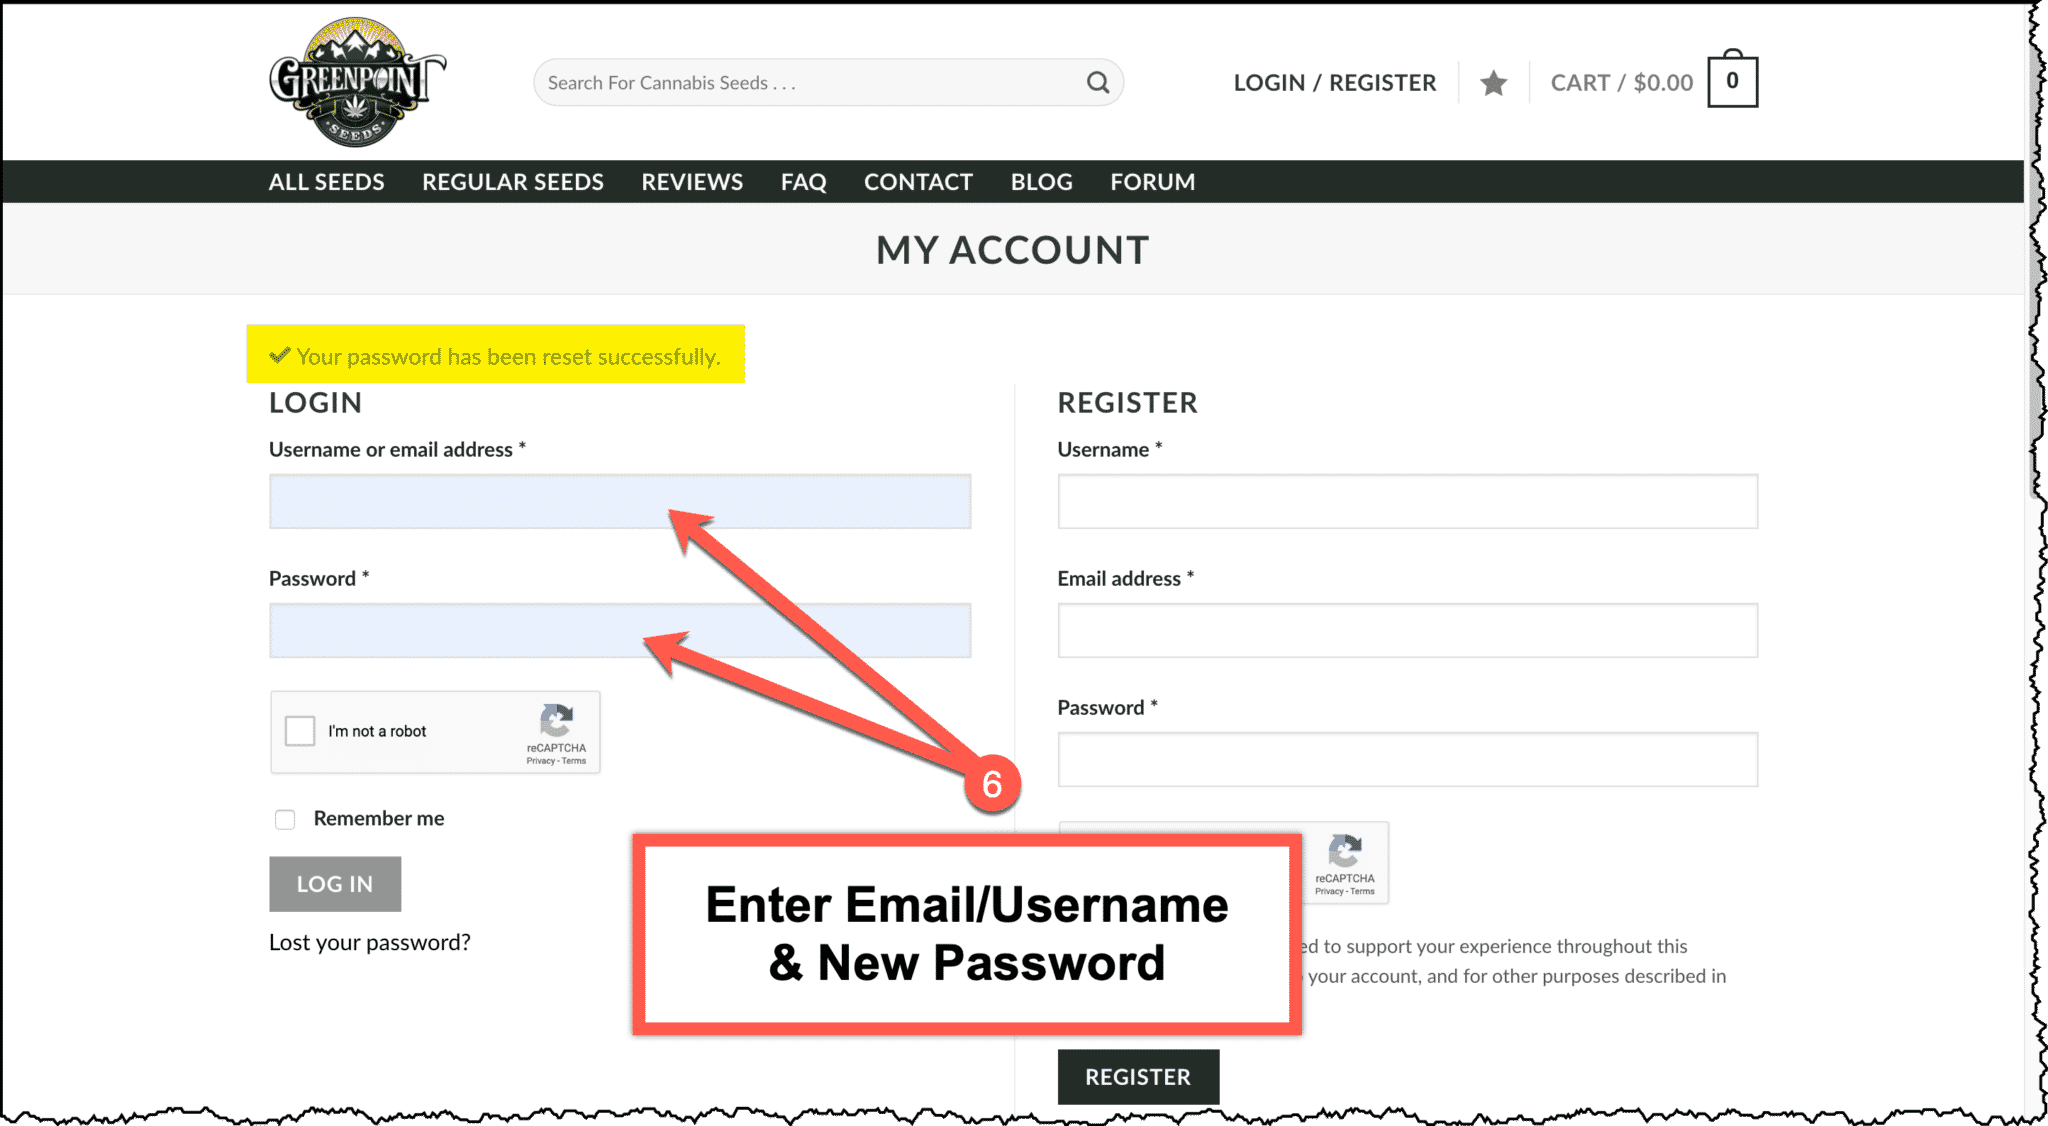 Login With New Password